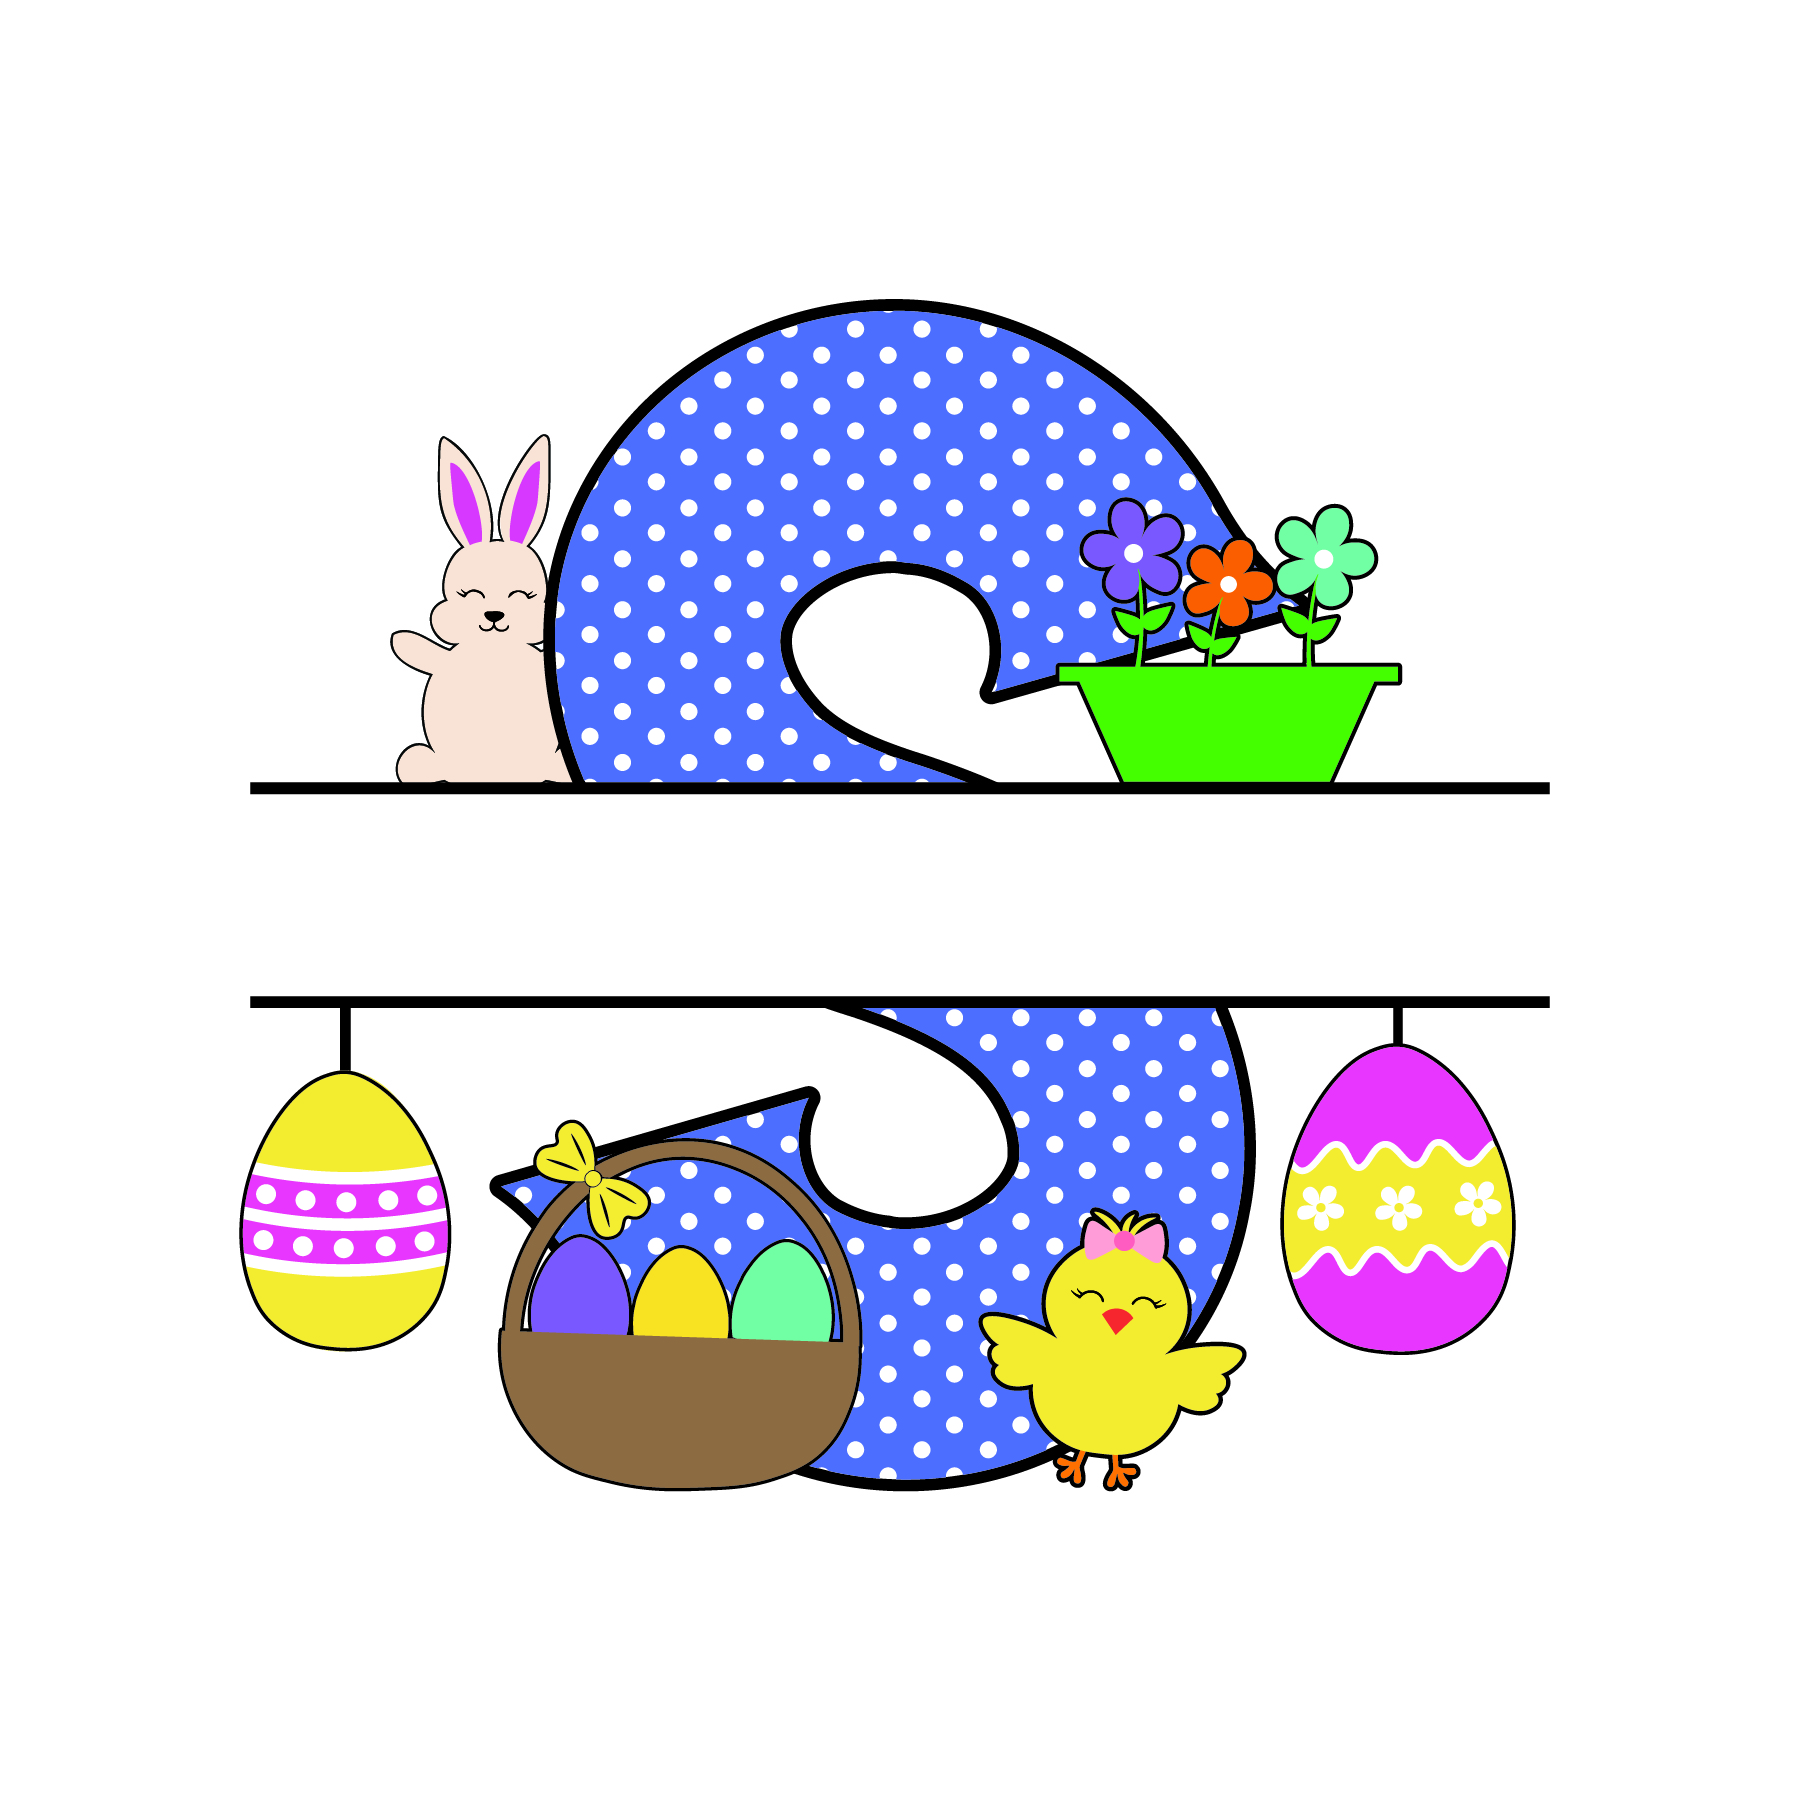 s letter free easter monogram bunny egg basket chicken clipart alphabet letter split customize or personalize stencil template to print or download vector svg laser vinyl circuit silhouette.